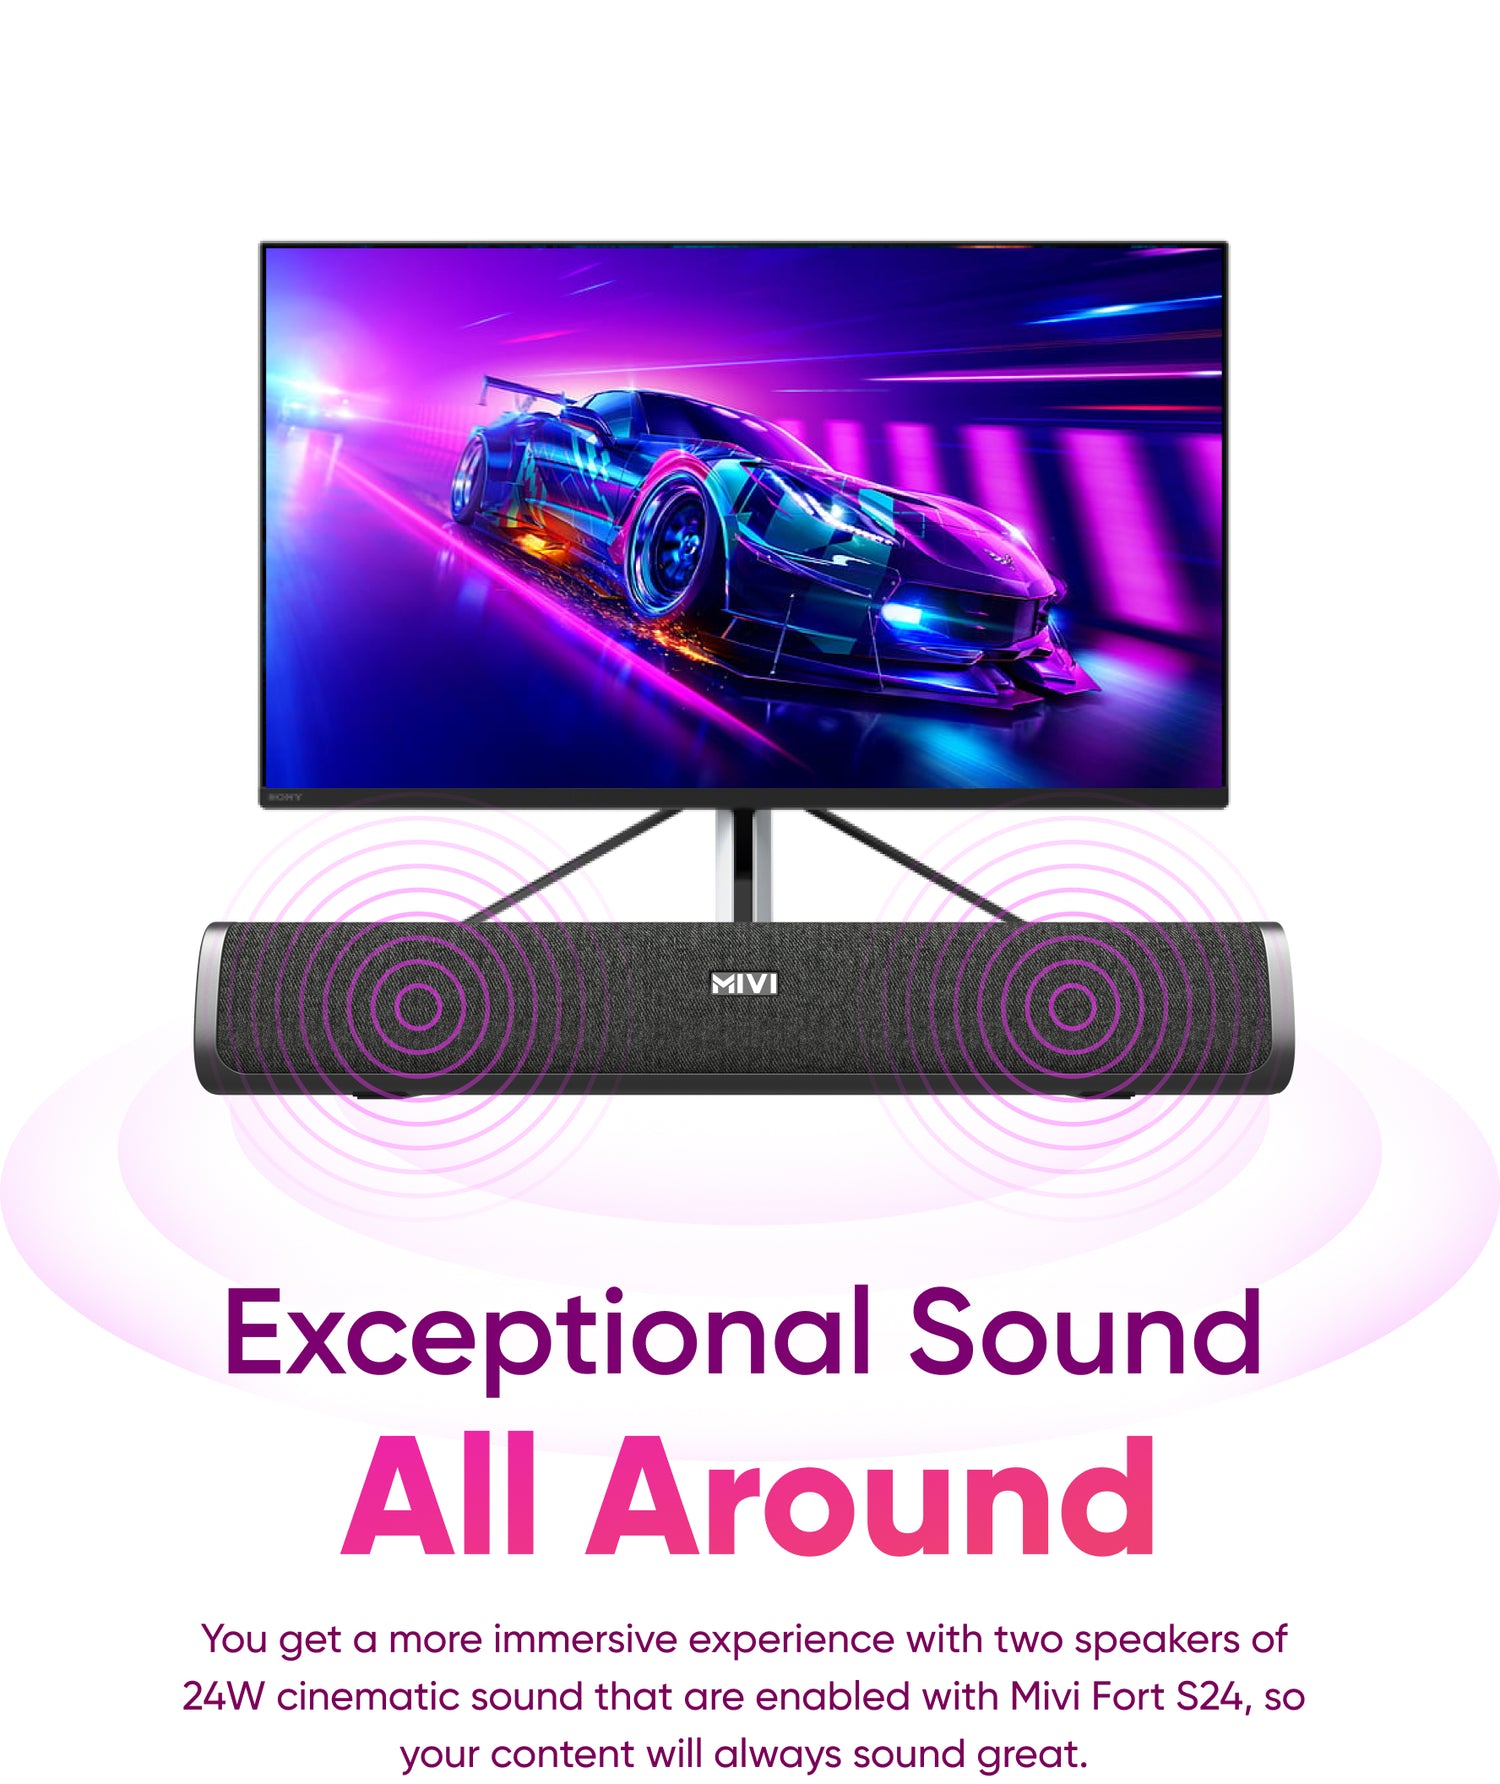 Exceptional Sound All Around - You get a more immersive experience with two speakers of 24W cinematic sound that are enabled with Mivi Fort S24, so your content will always sound great.